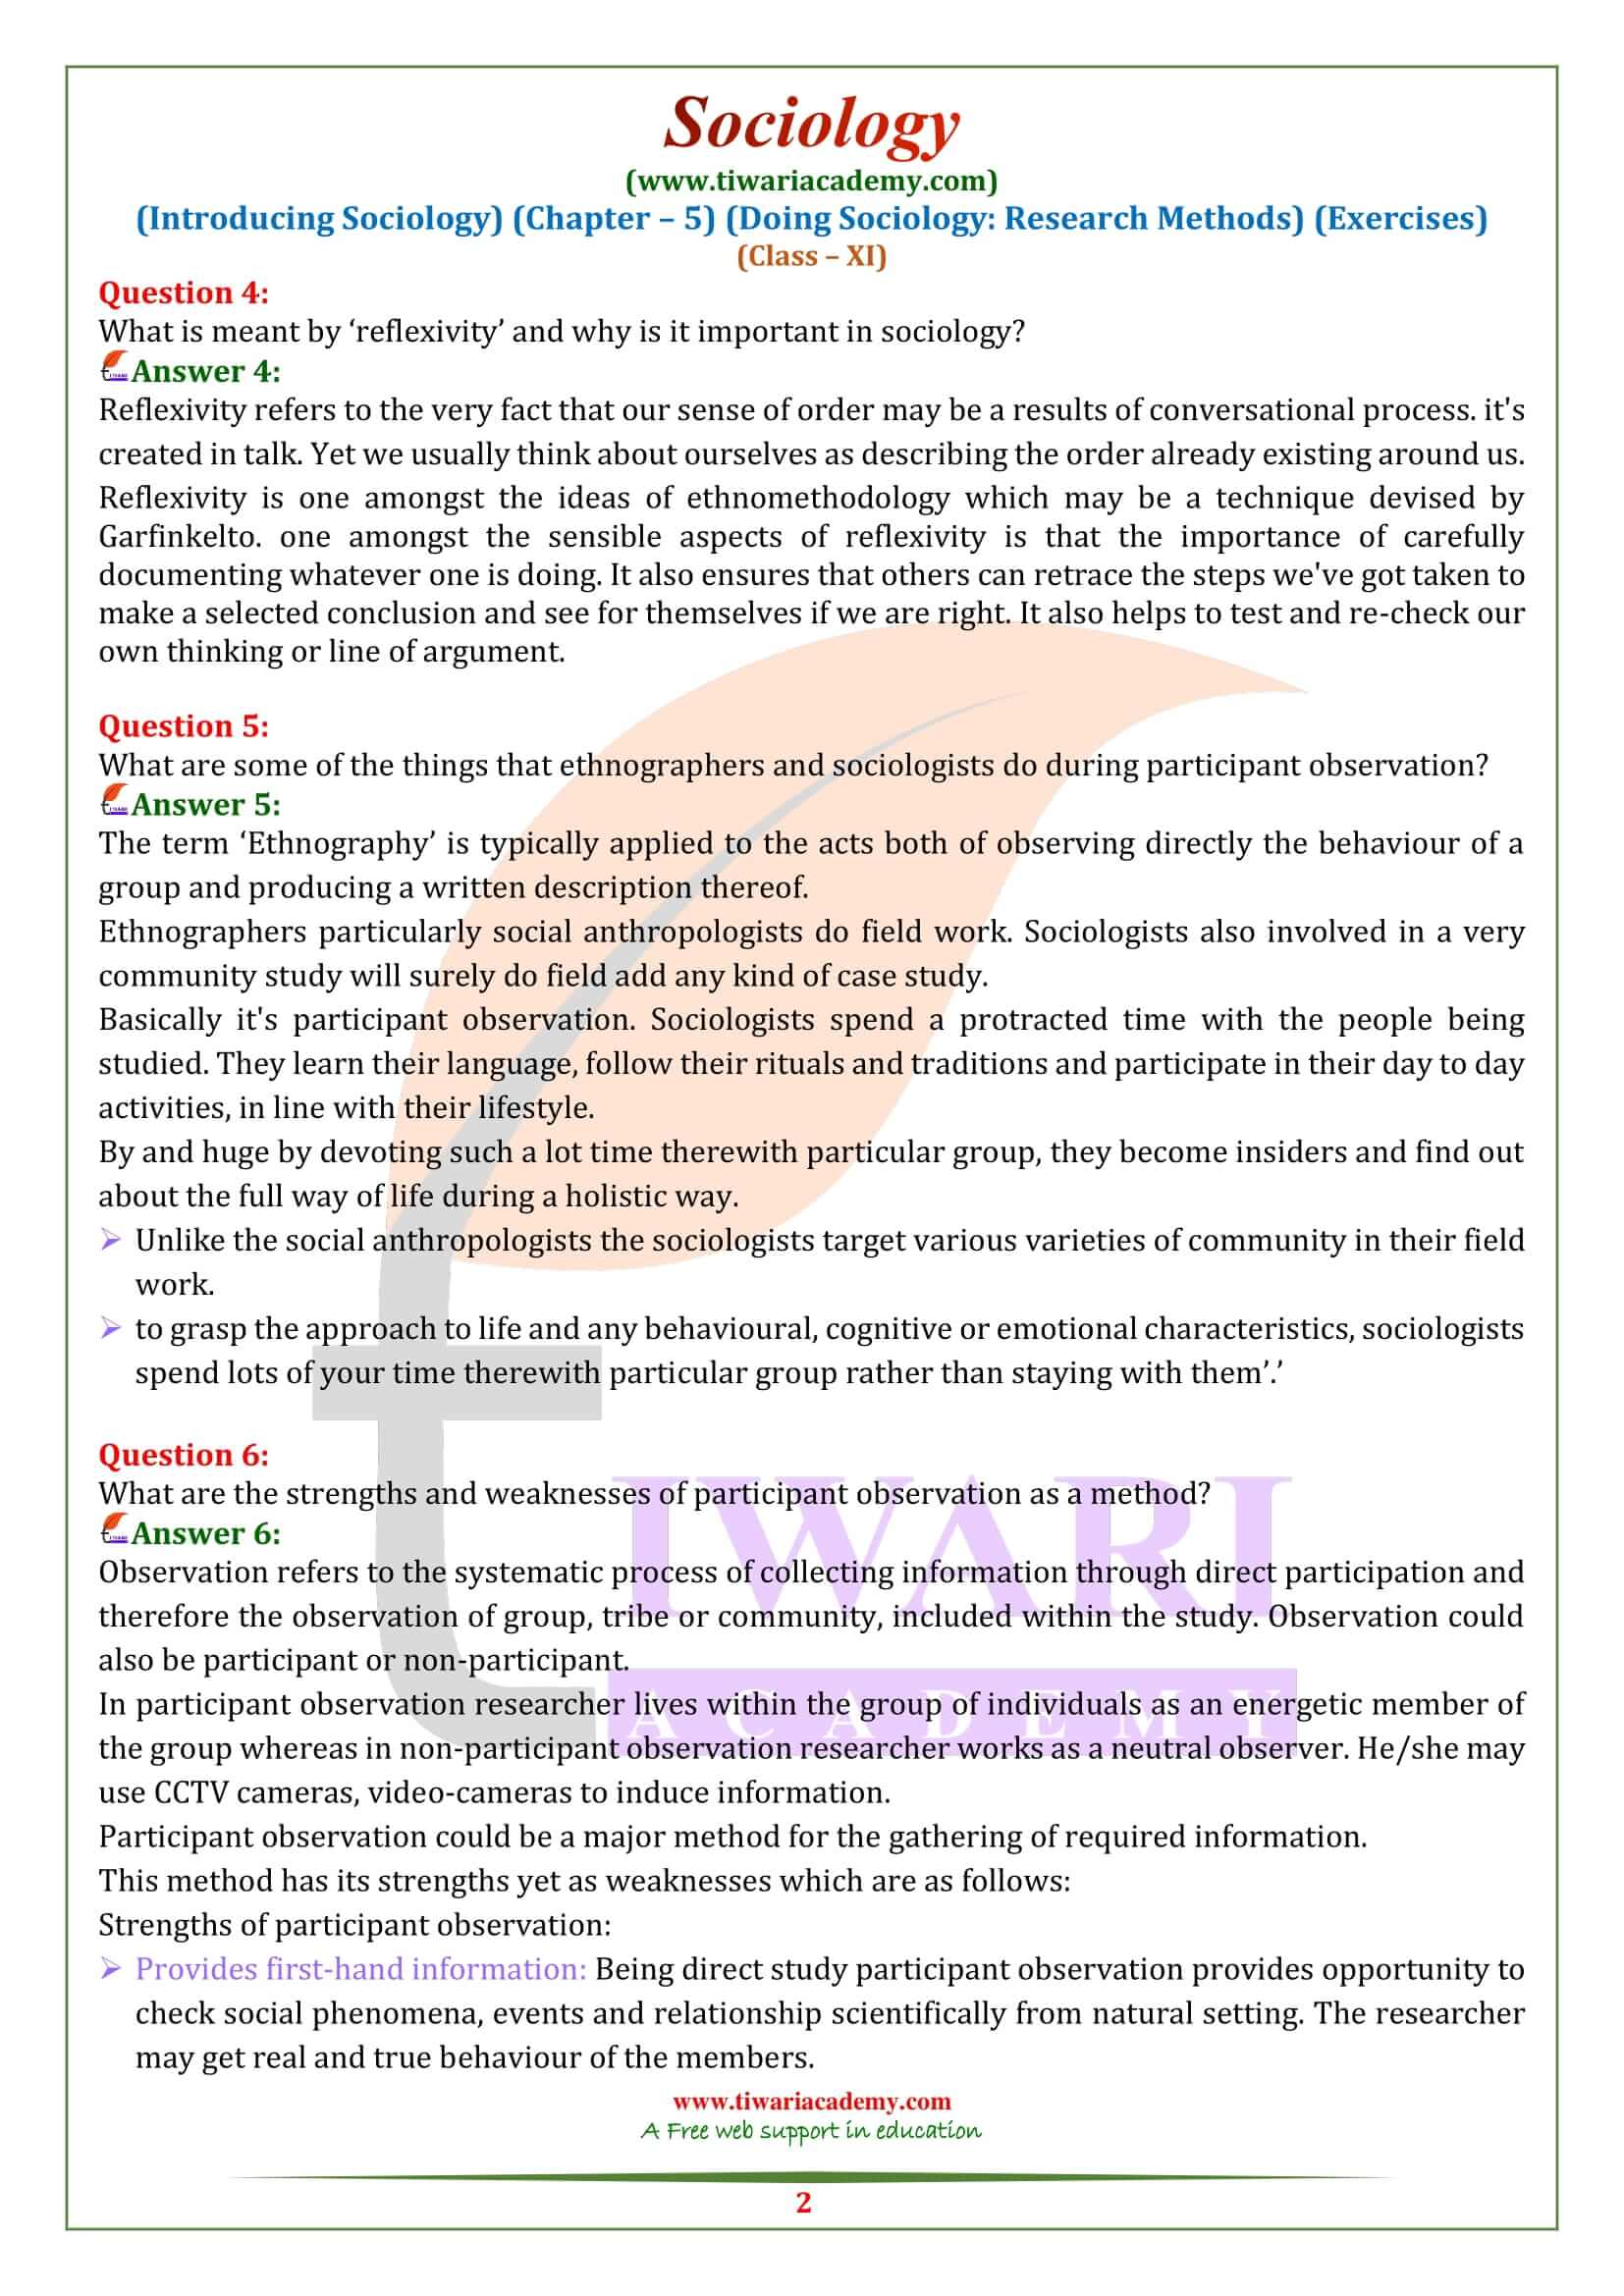 NCERT Solutions for Class 11 Sociology Chapter 5